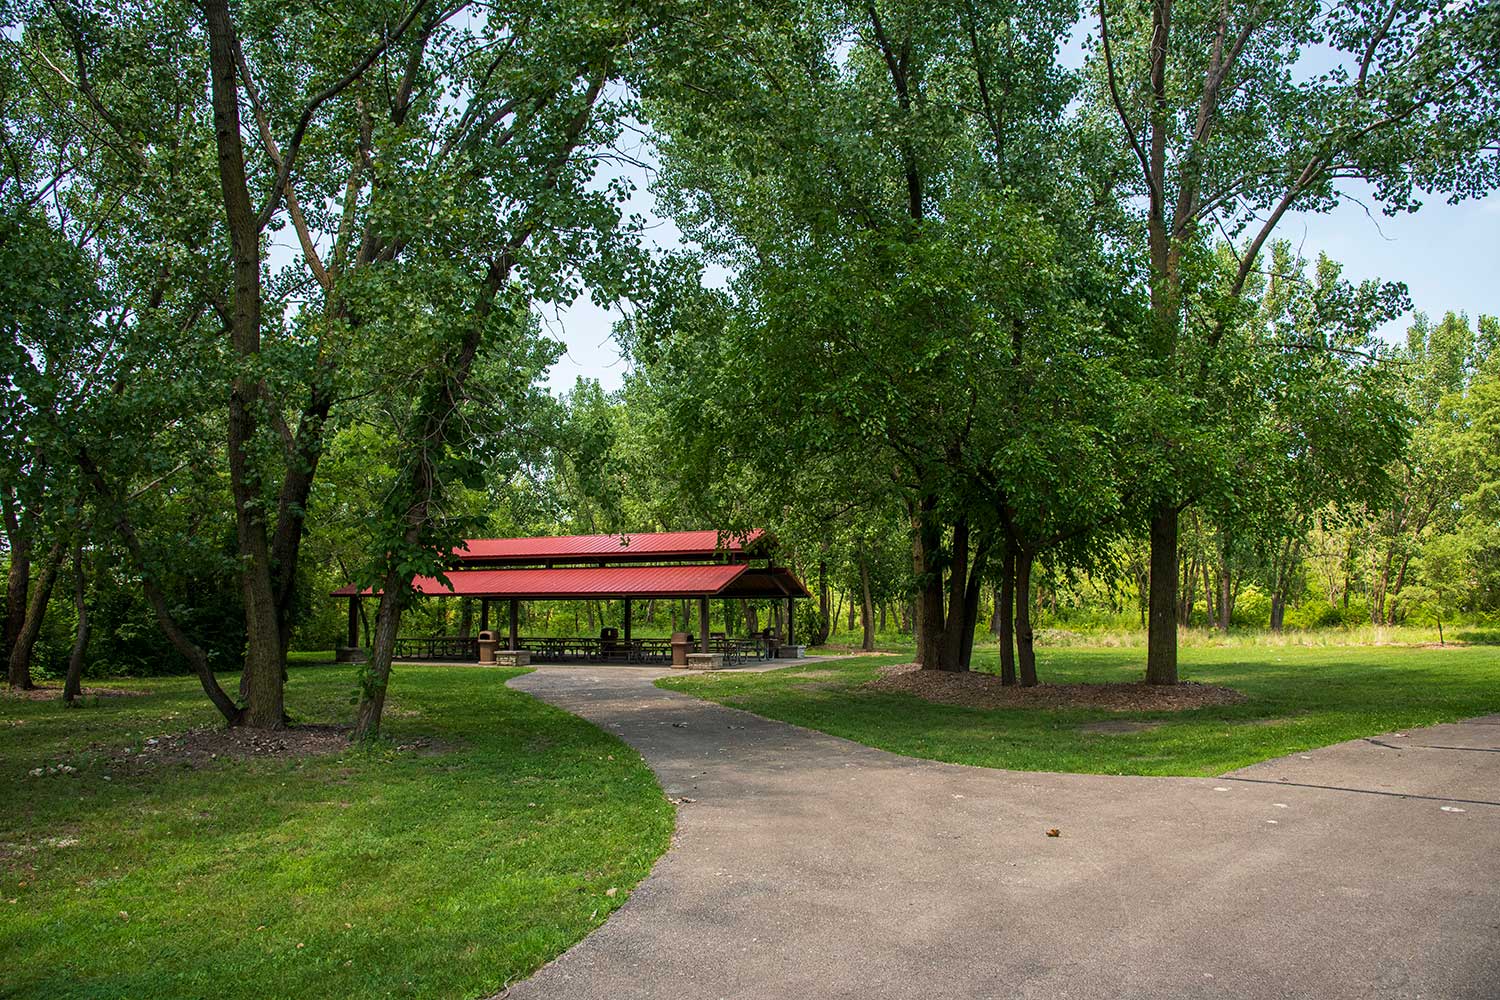 A picnic shelter surrounded by tall trees at the end of a trail.